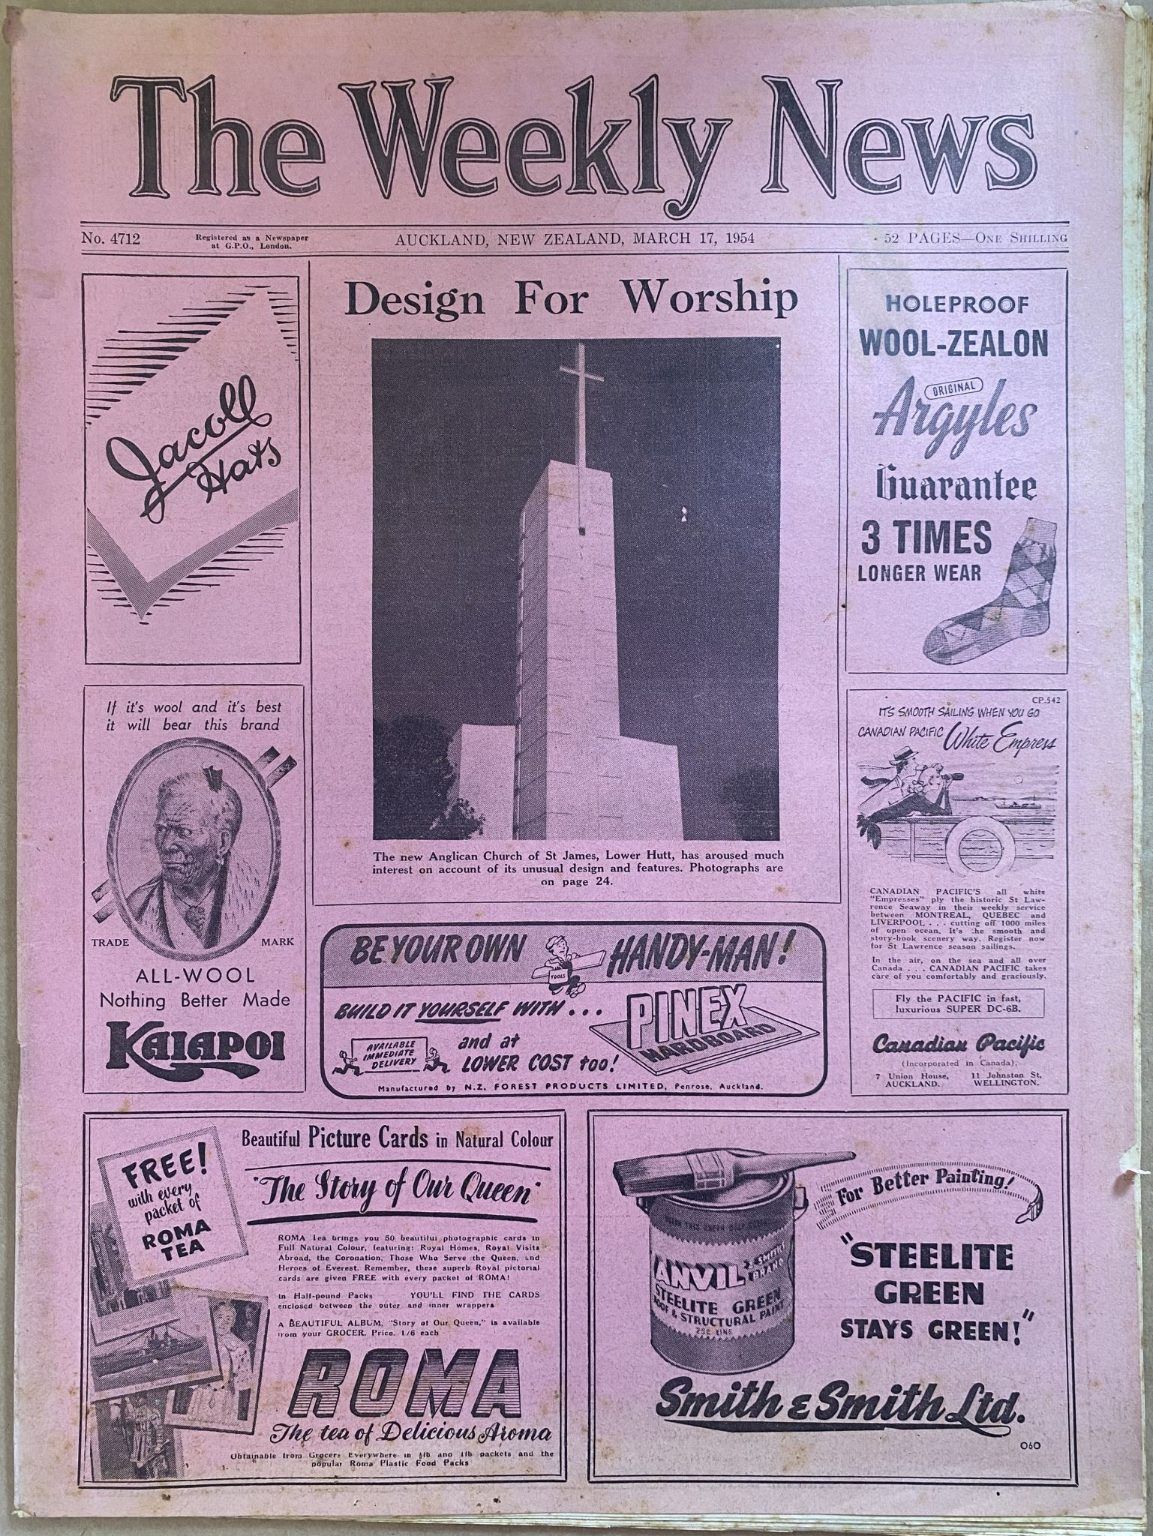 OLD NEWSPAPER: The Weekly News - No. 4712, 17 March 1954